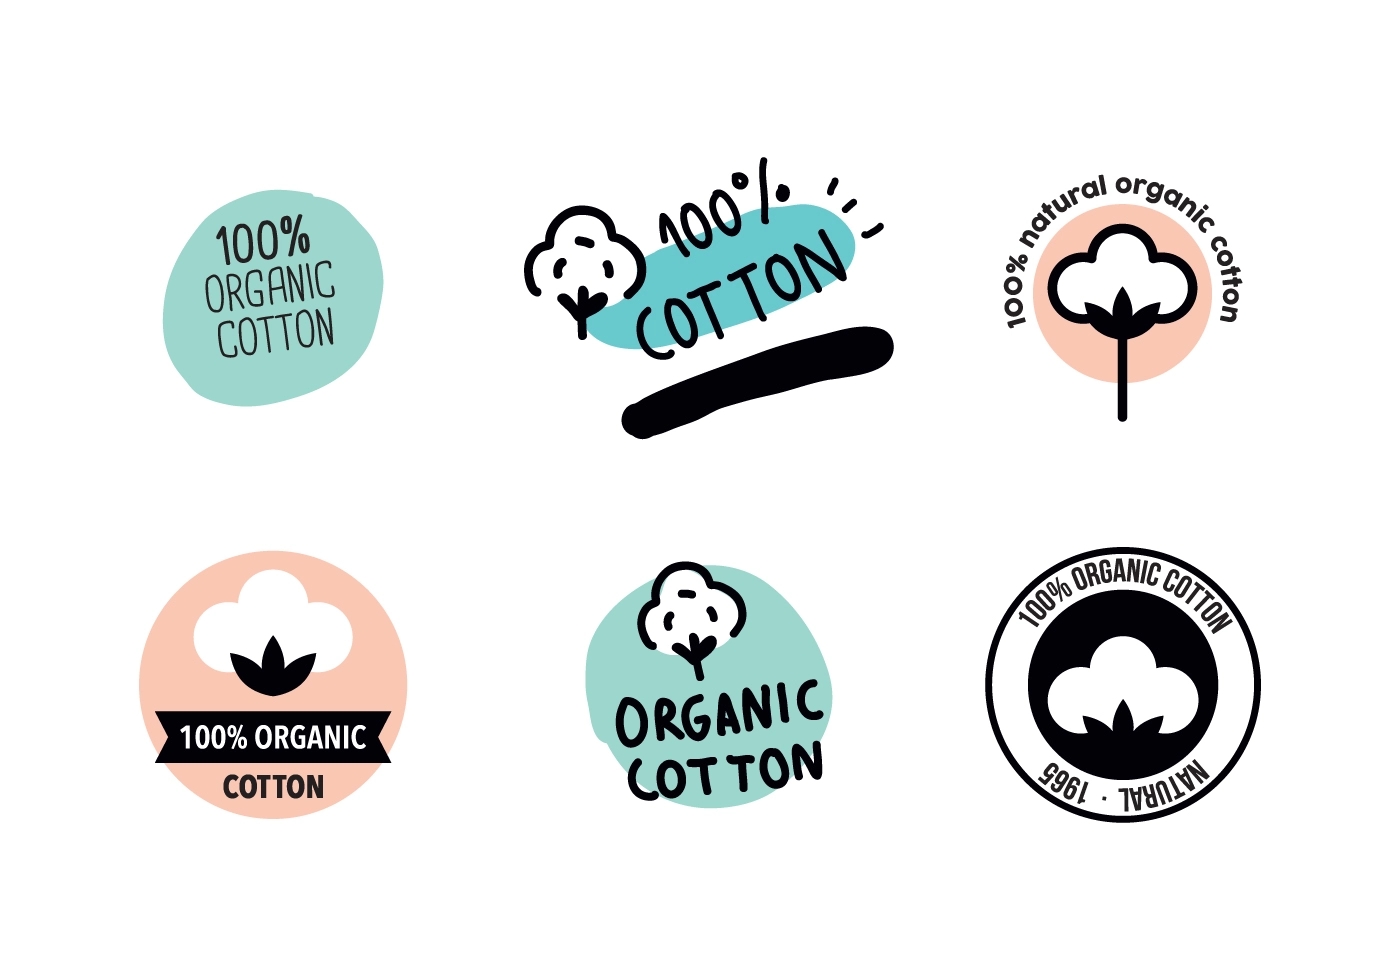 What Is Organic Cotton?